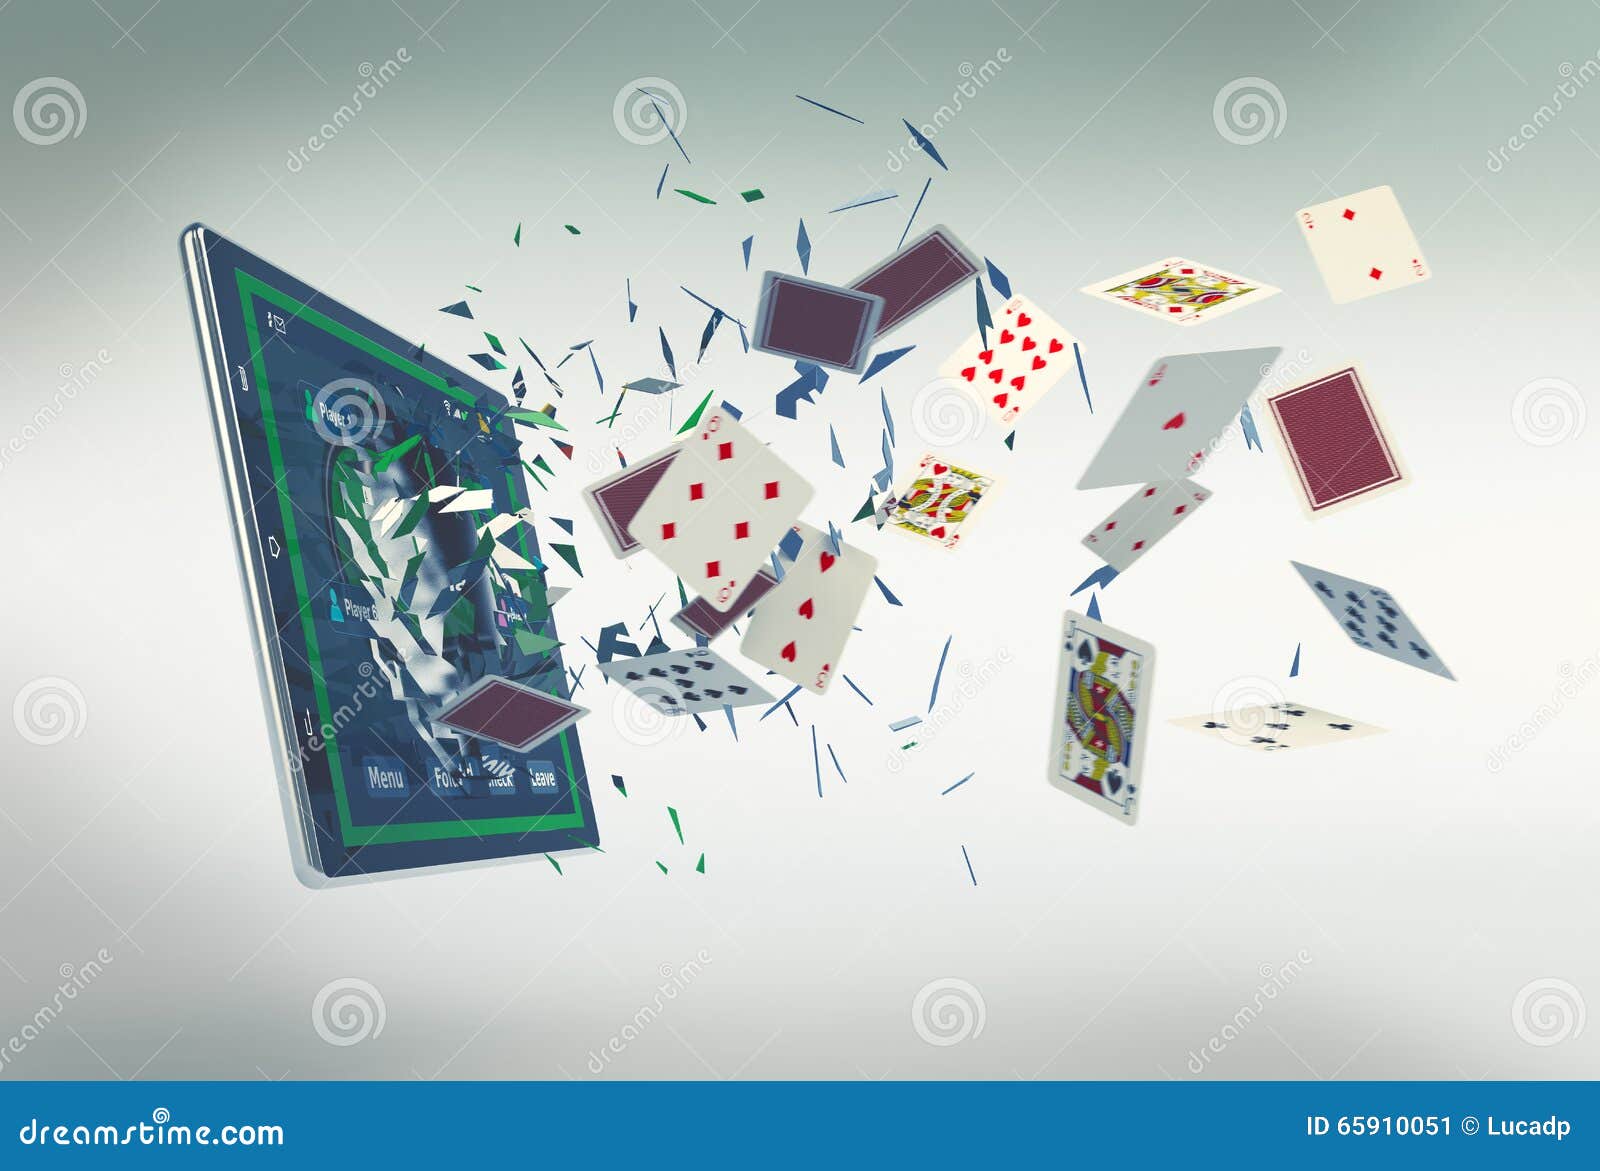 poker-online-tablet-pc-app-lot-cards-coming-out-breaking-glass-concept-gaming-d-render-65910051.jpg